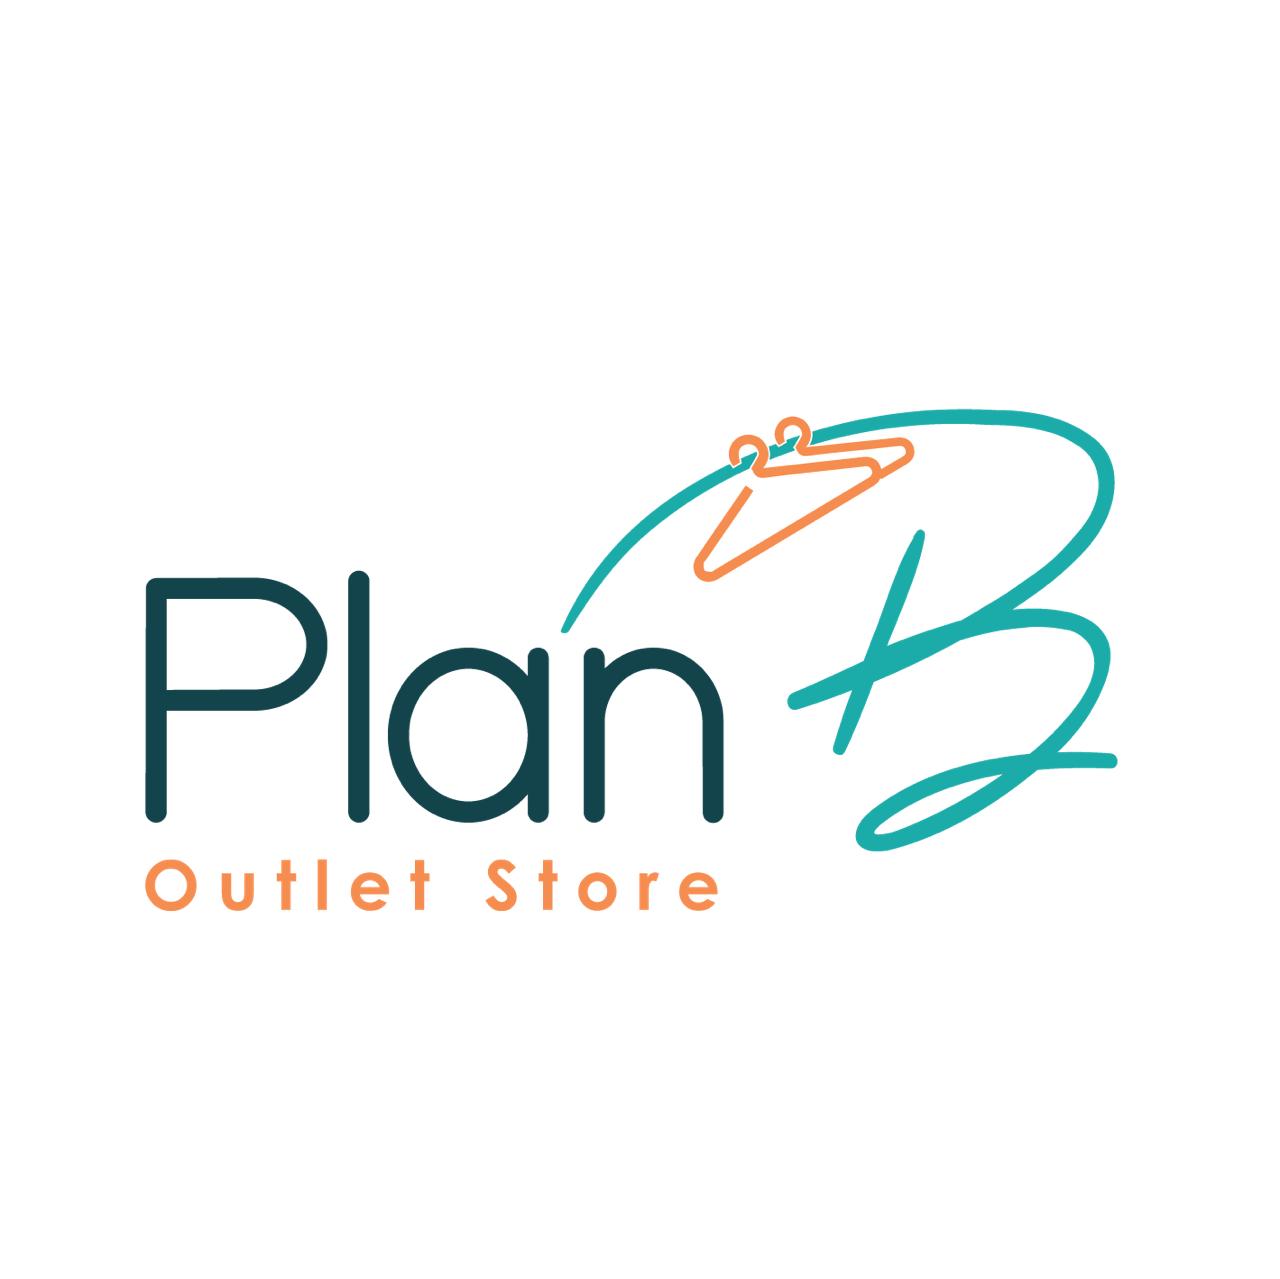 Planb_outlet